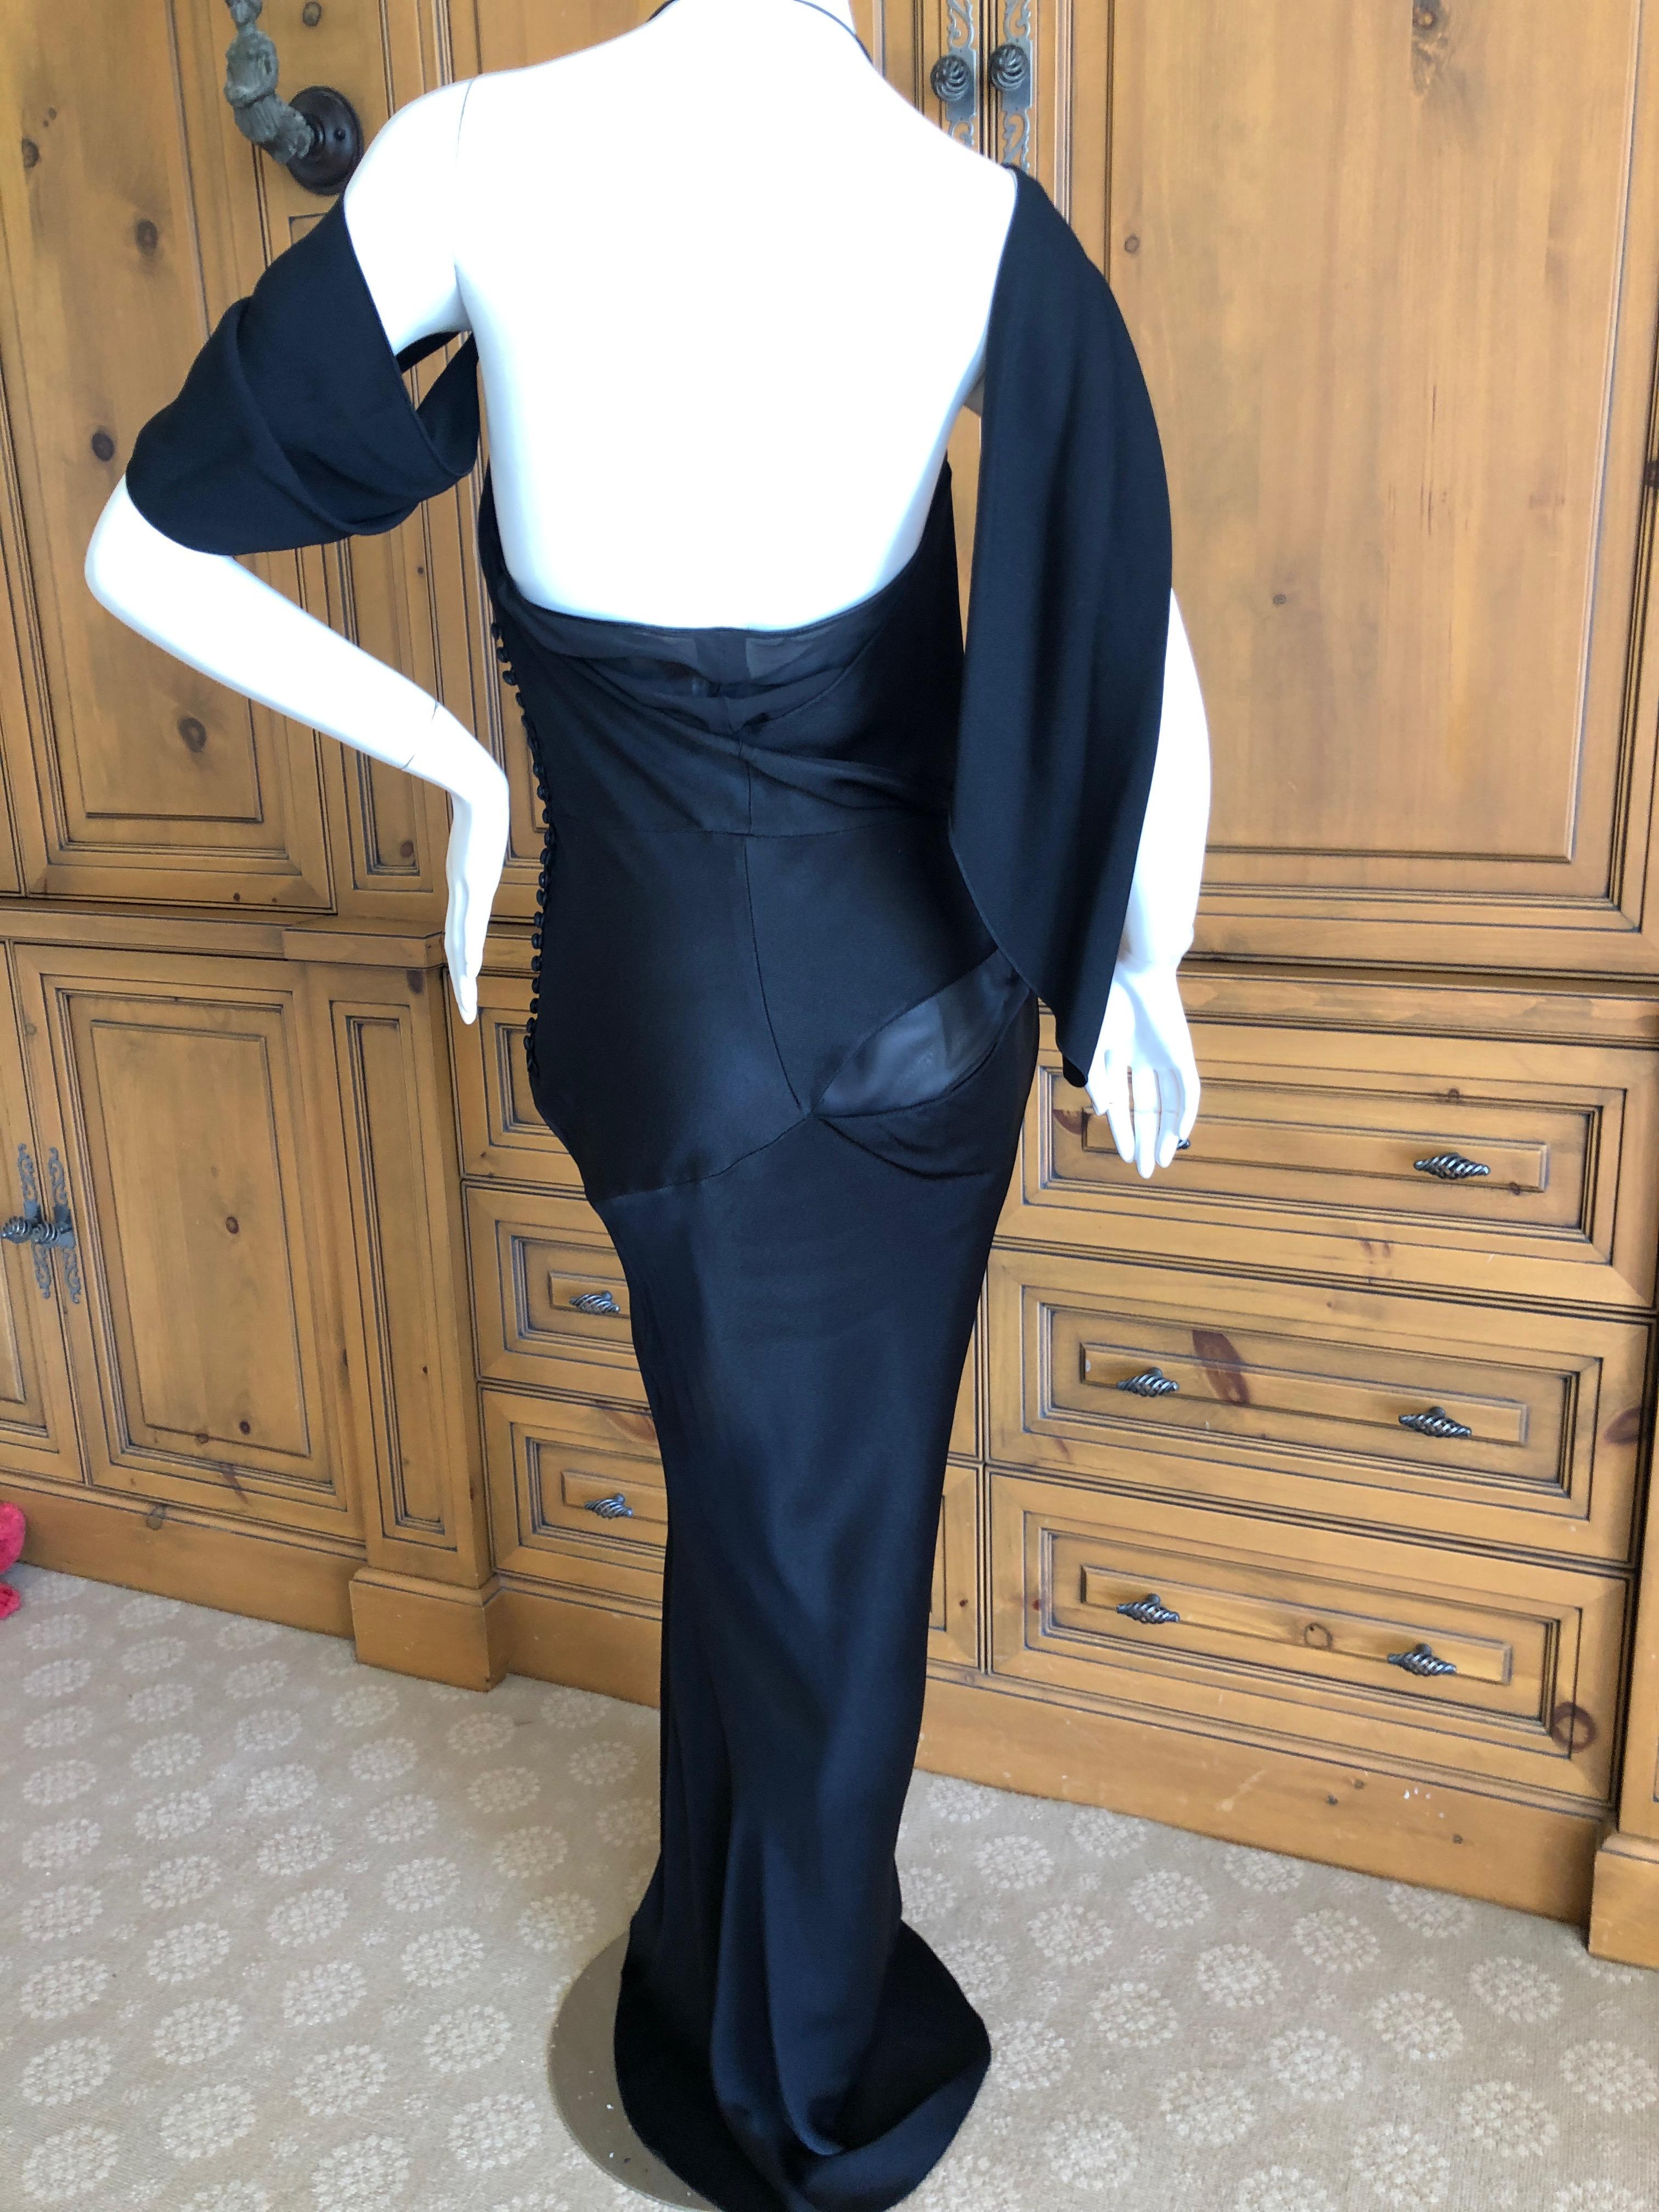 John Galliano Spring 2000 Black Bias Cut Evening Dress with Sheer Inserts Sz 42 For Sale 5